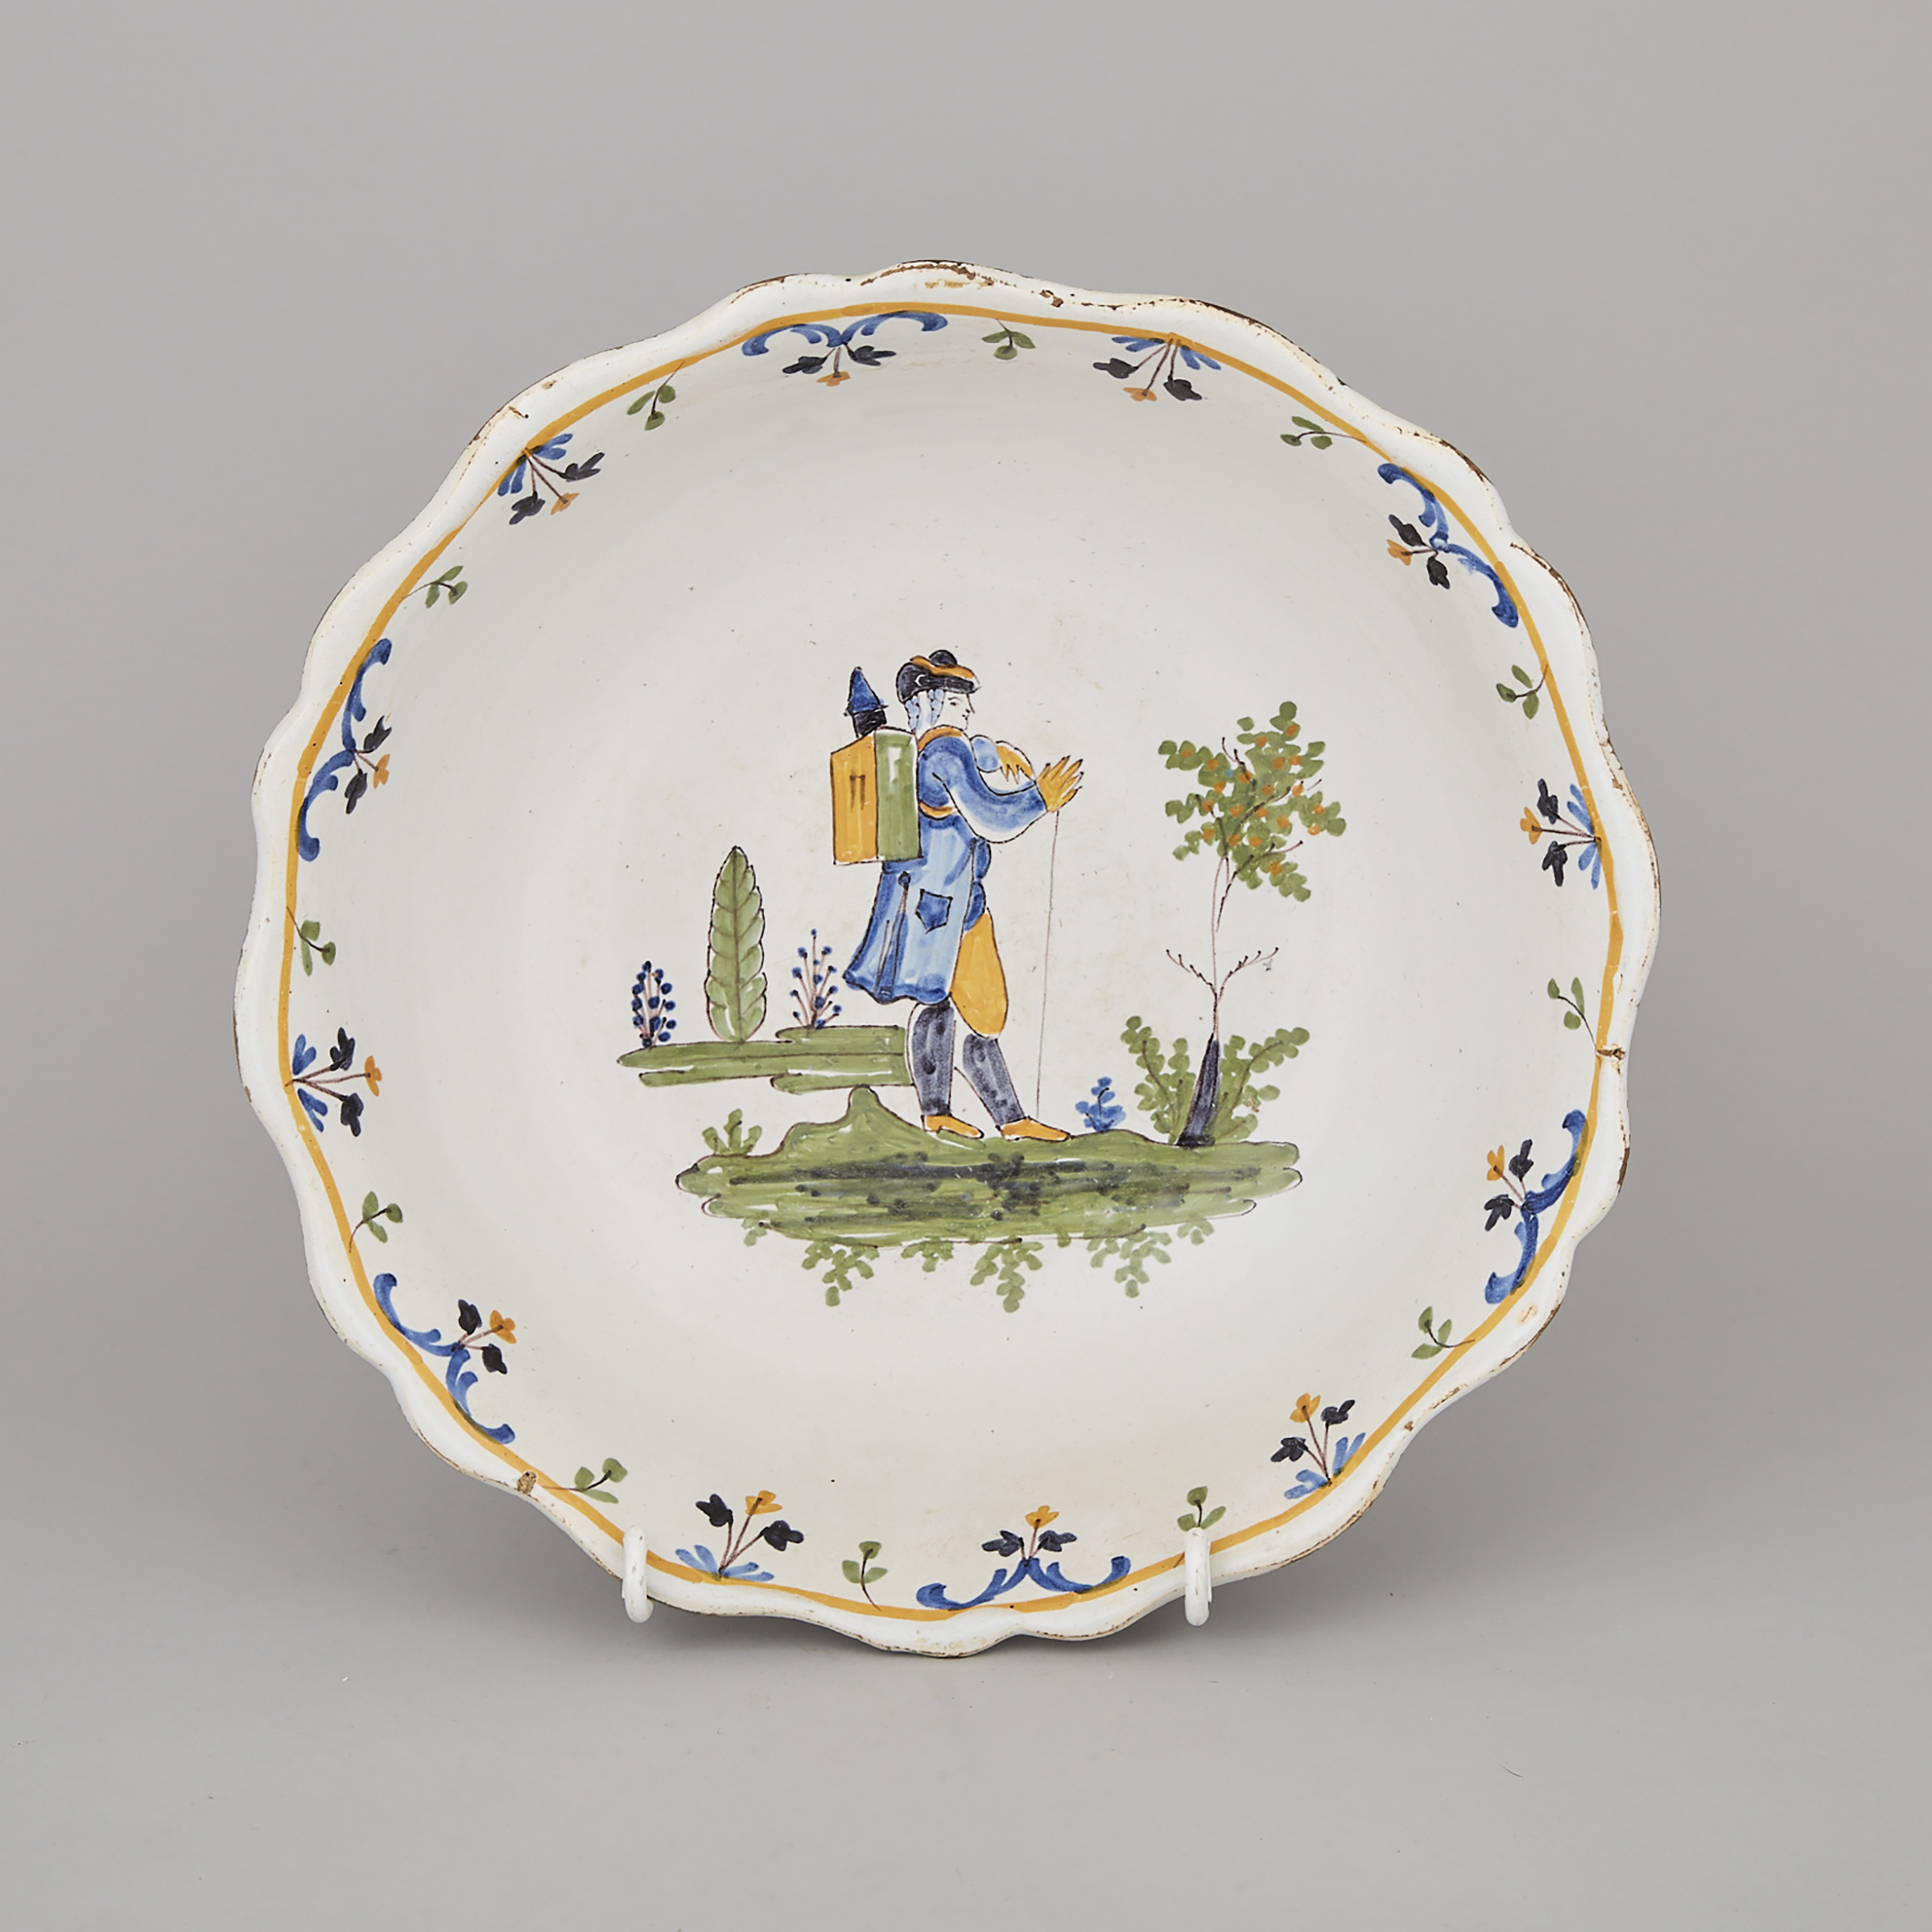 French Faience Polychrome Basin, late 18th/early 19th century